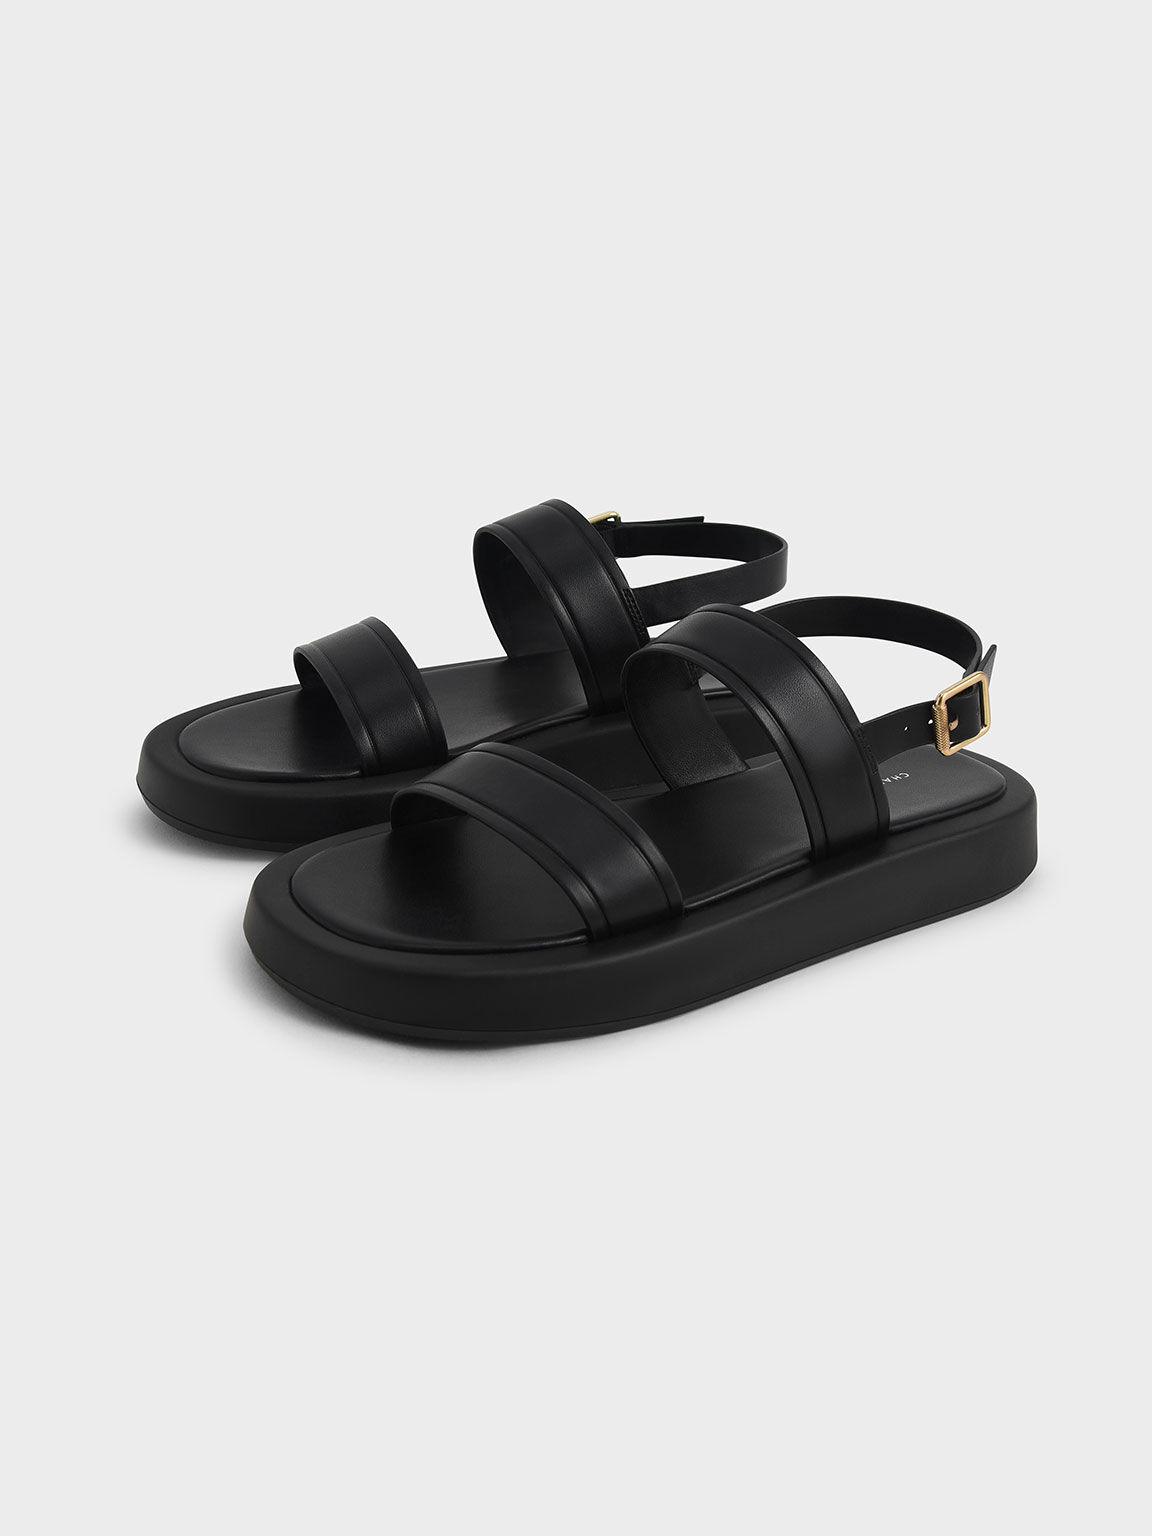 Womens Shoes Flats and flat shoes Flat sandals Charles & Keith Denim Open Toe Slingback Platform Sandals in Black 